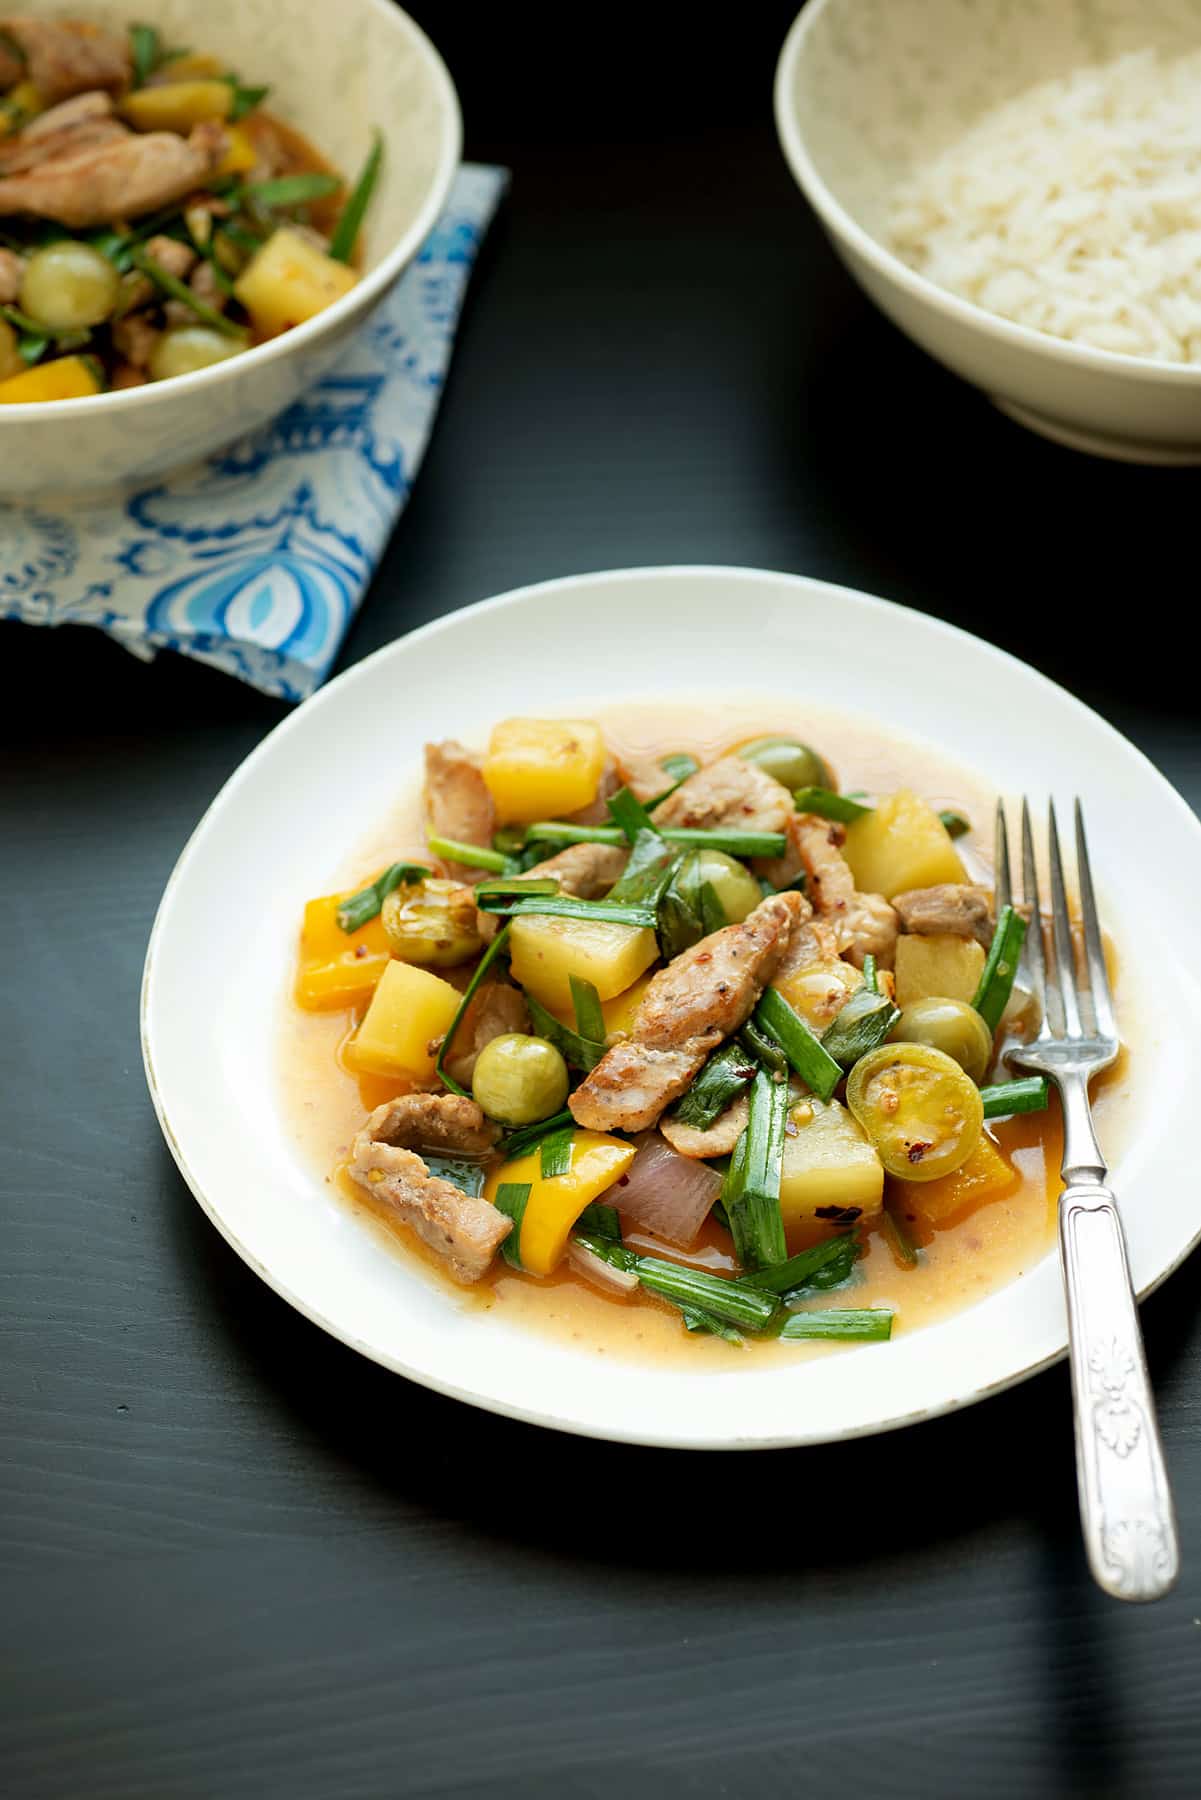 Sweet and sour pork with pineapple.